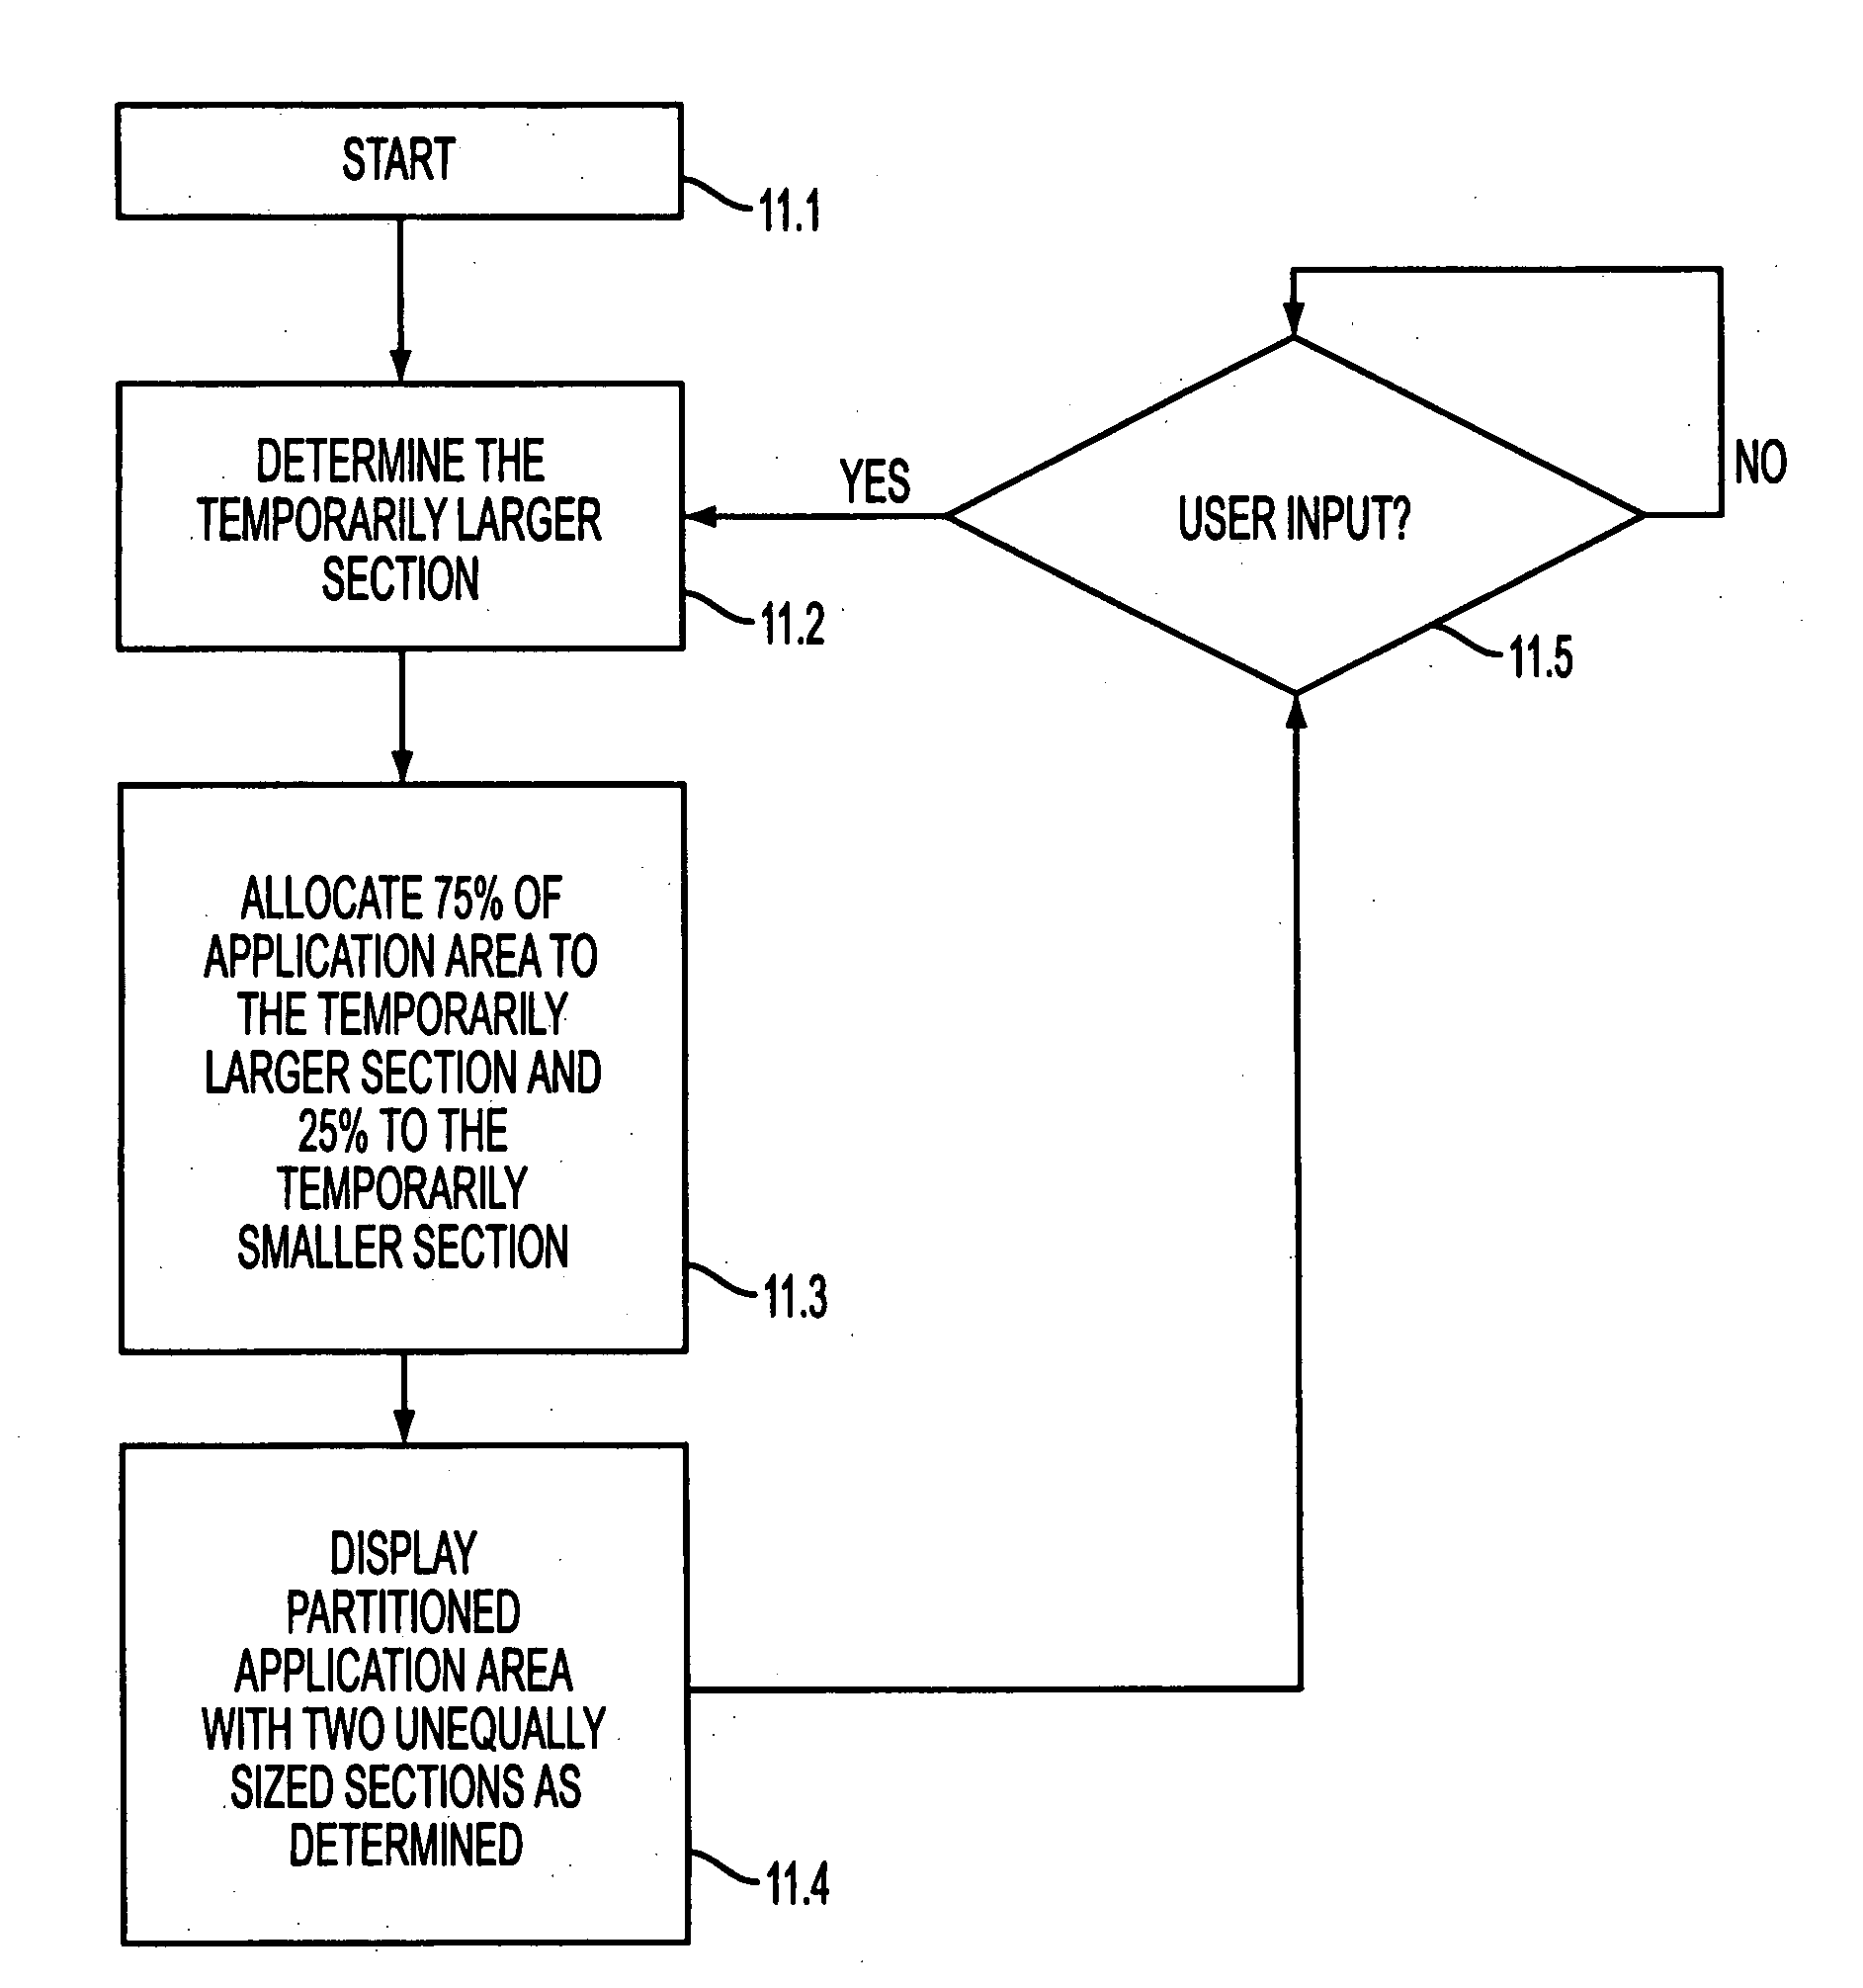 Mobile communications terminal having an improved user interface and method therefor